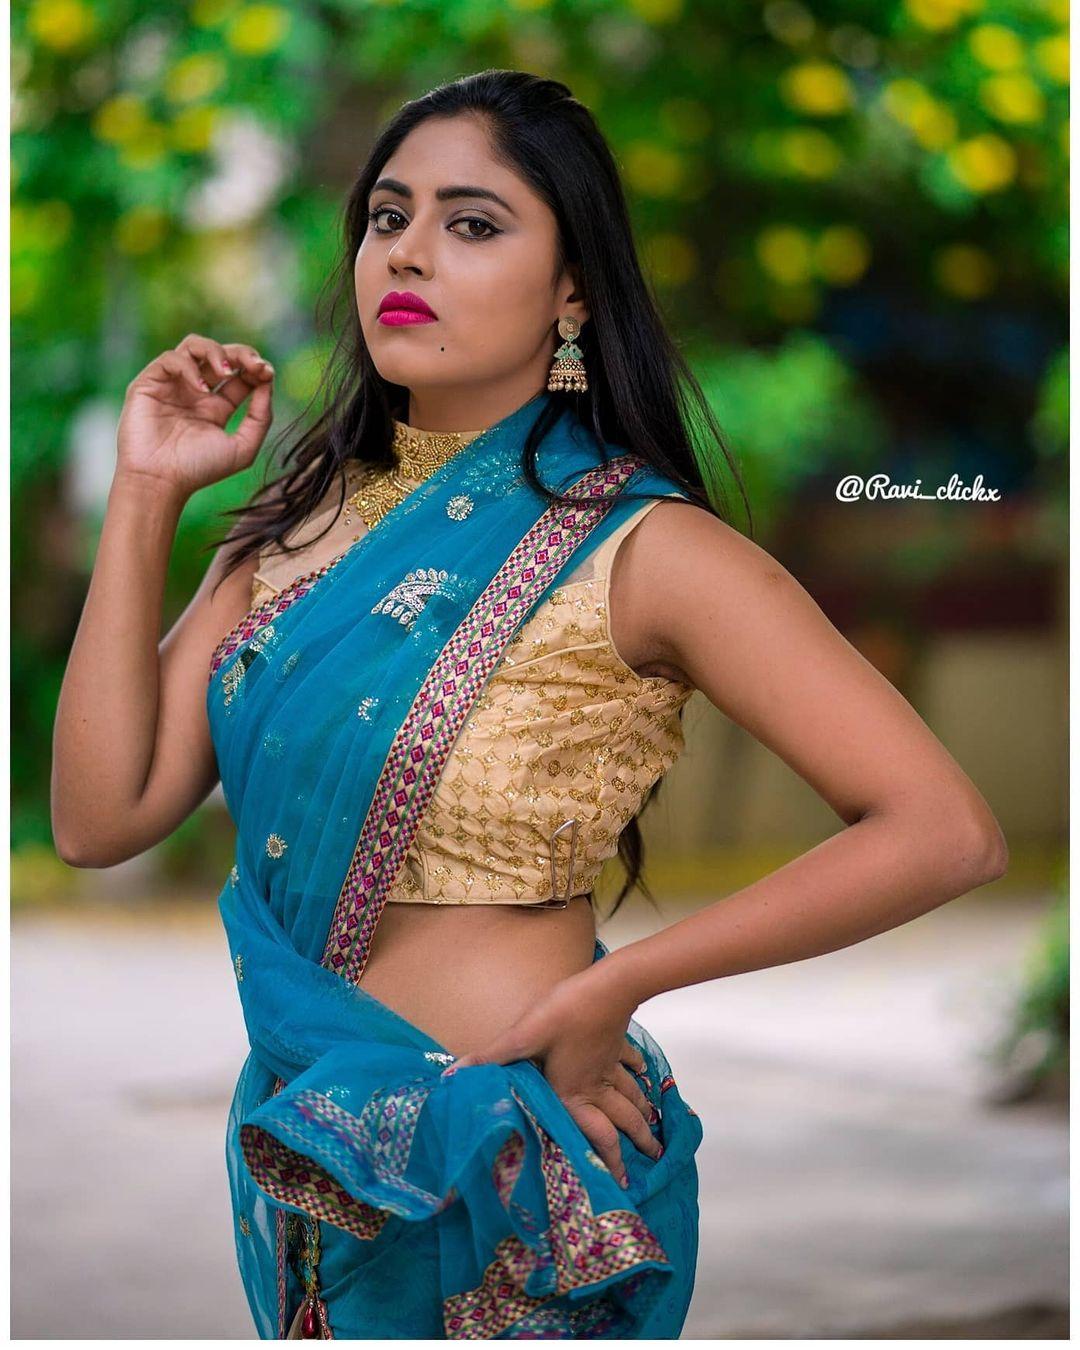 Telugu actress in saree hot photos | Mahi Maheshwari very beautiful and  glamorous pictures Photos: HD Images, Pictures, Stills, First Look Posters  of Telugu actress in saree hot photos | Mahi Maheshwari